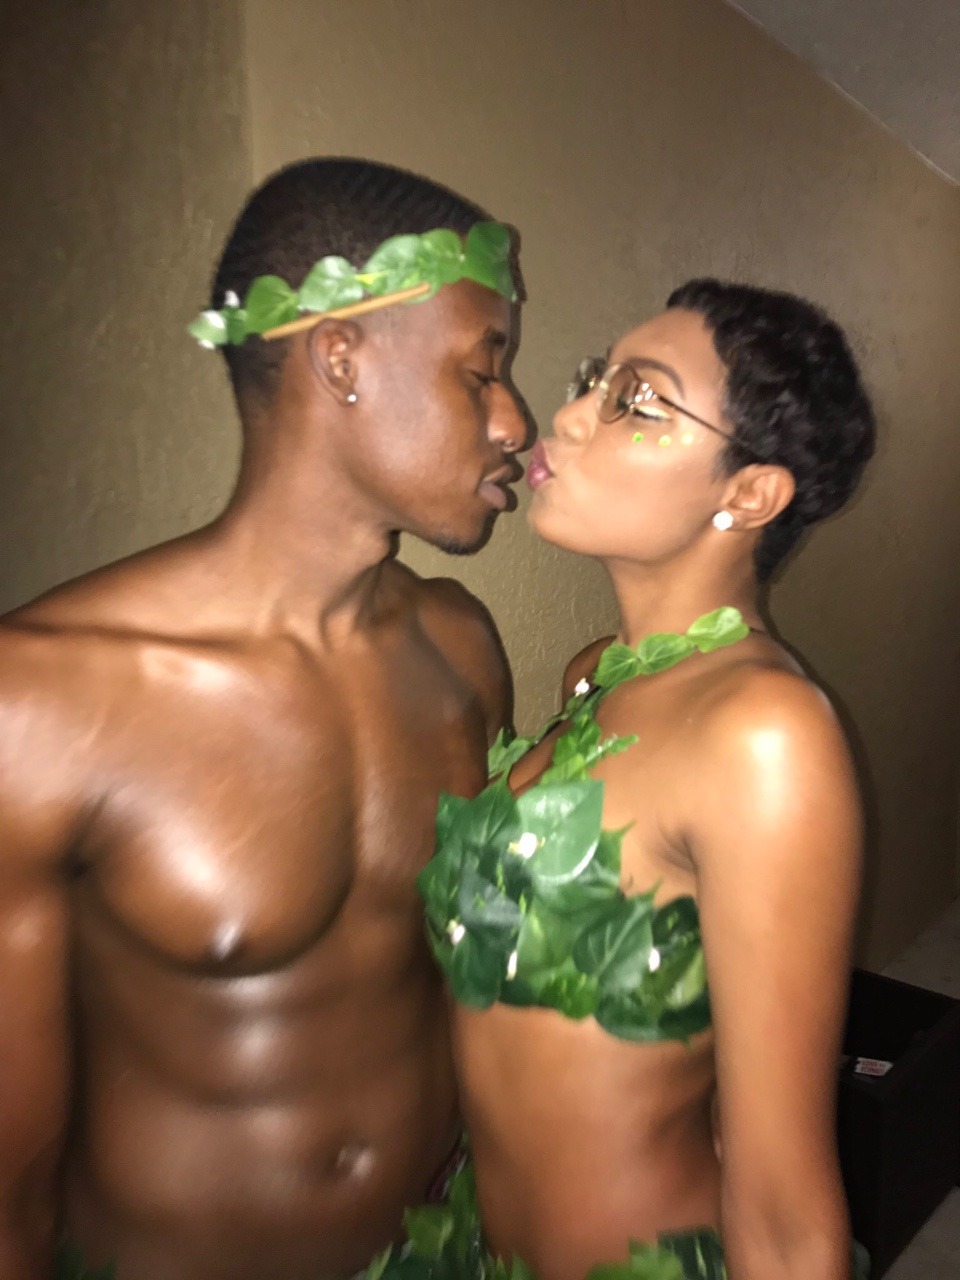 chrissongzzz:  My cousin and his girlfriend as Adam and Eve. 👏🏾👏🏾👏🏾